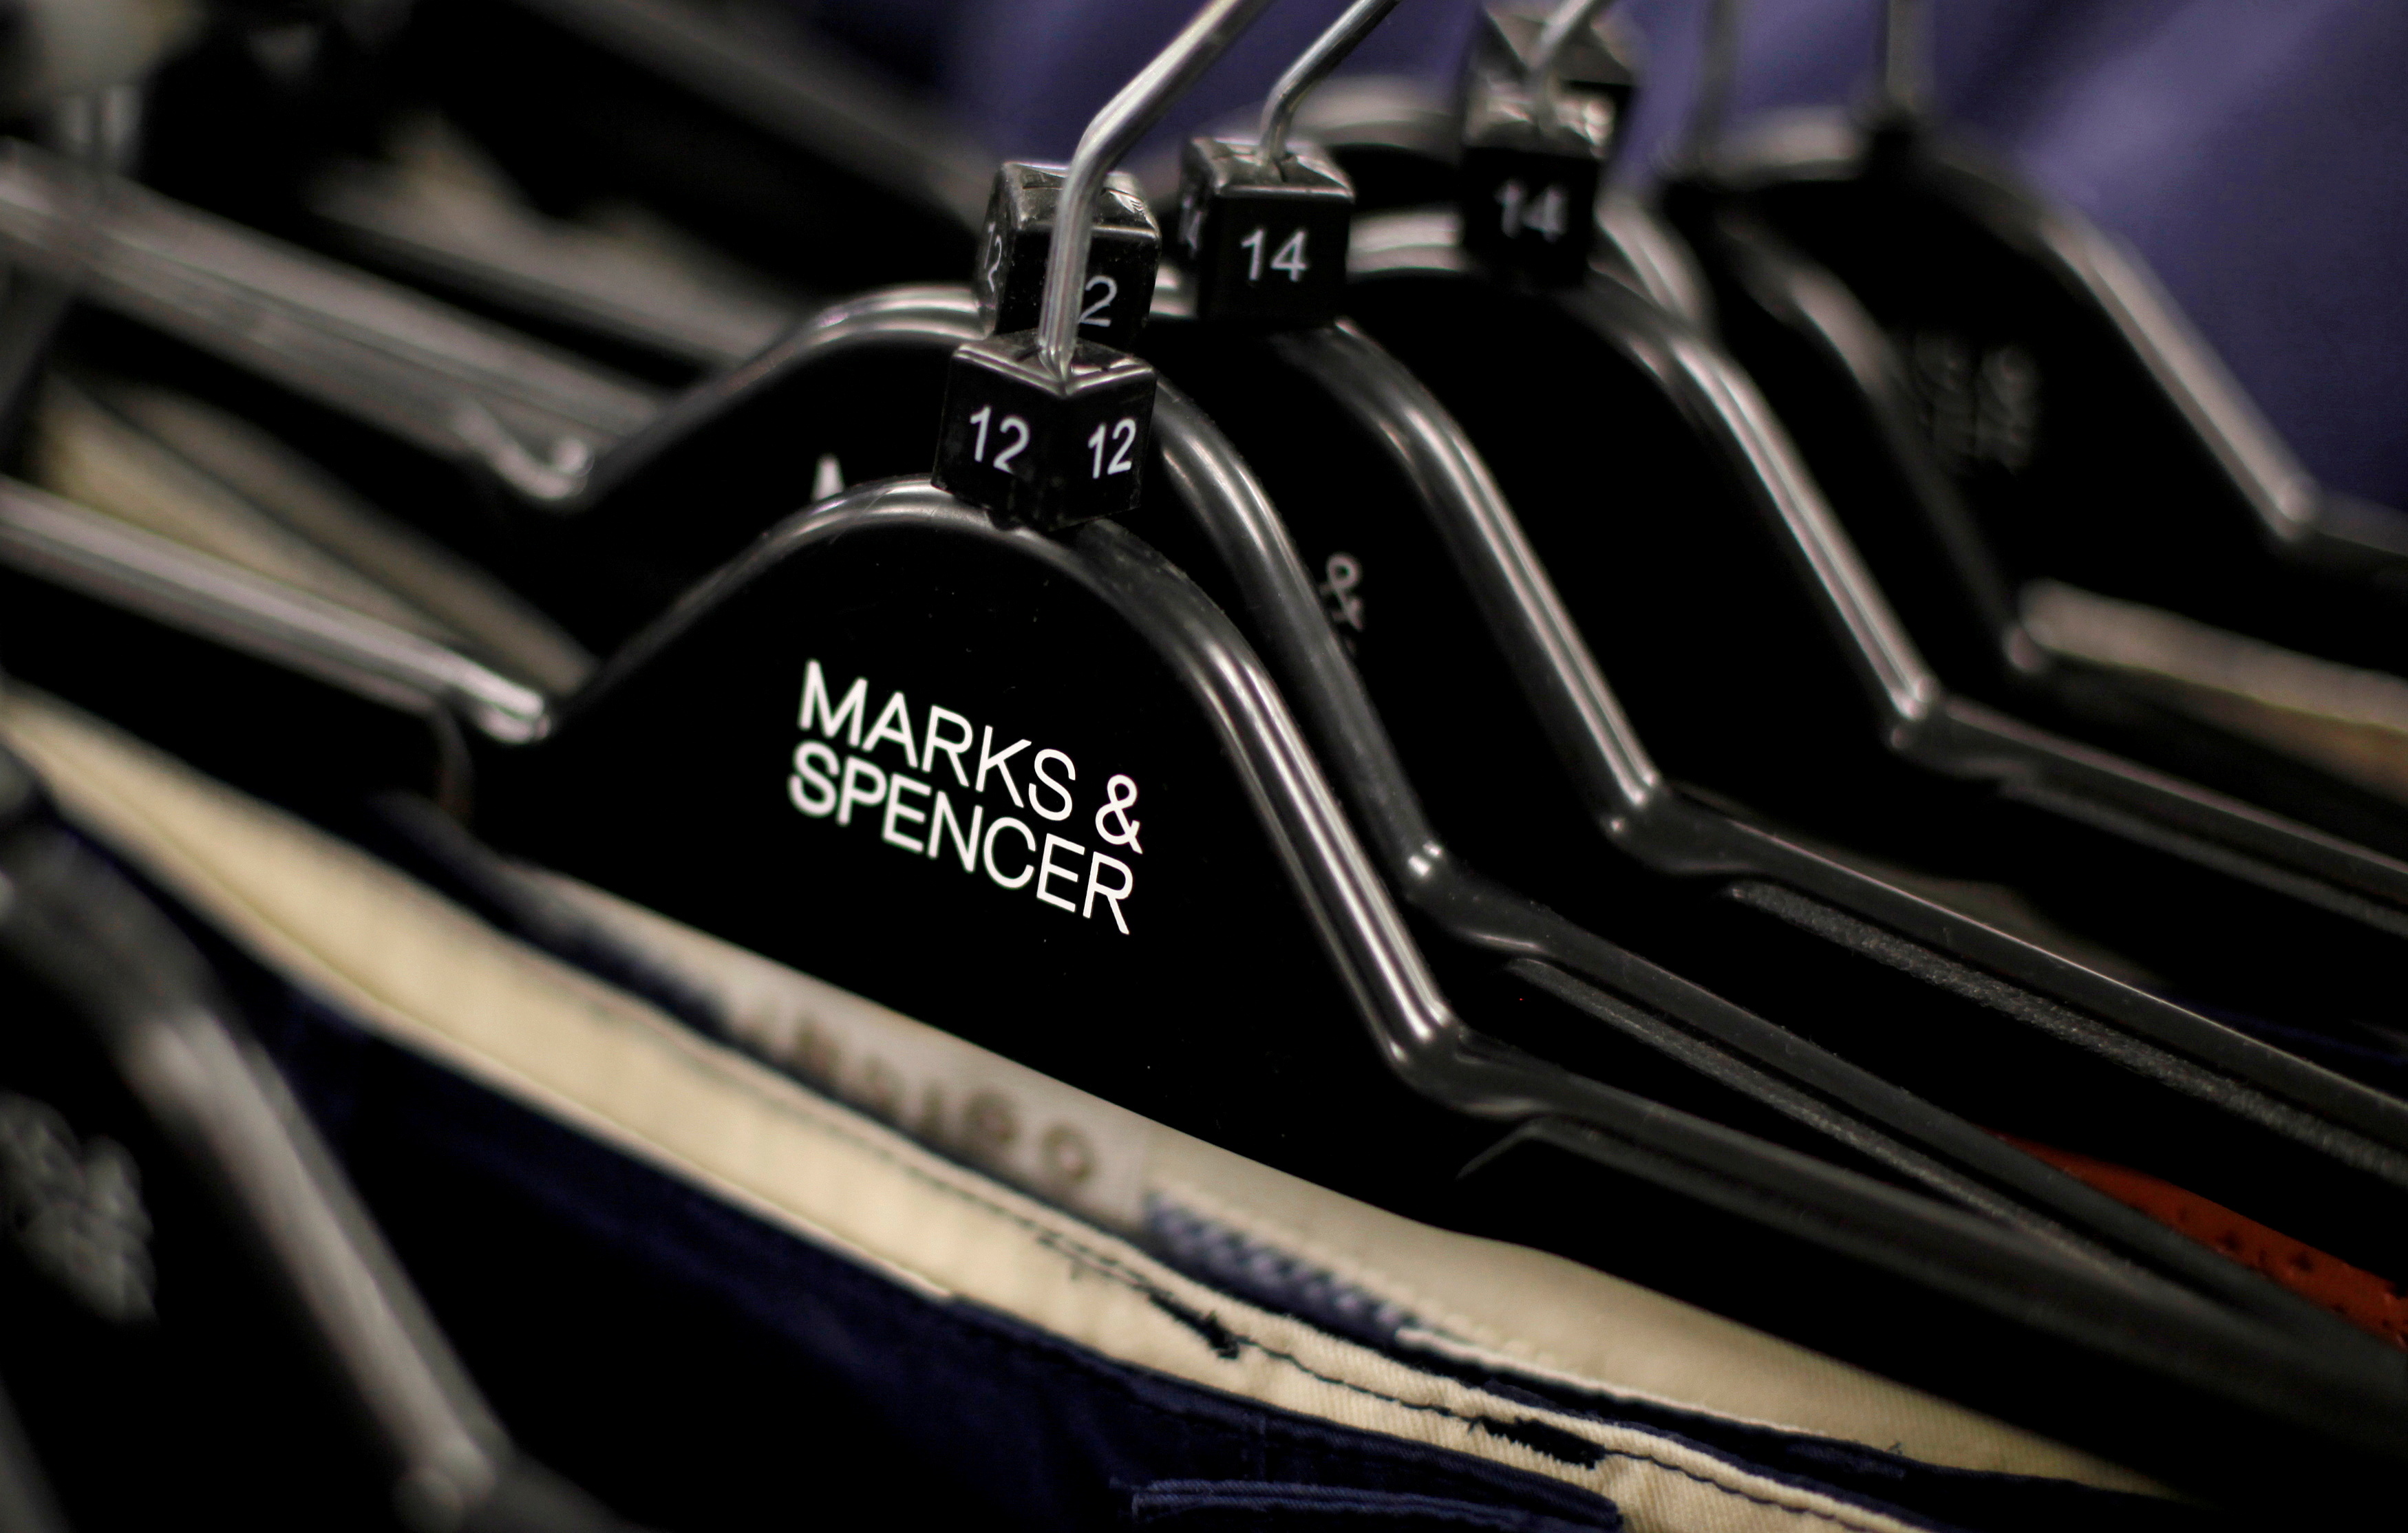 Clothes displayed on hangers in an Marks & Spencer shop in northwest London